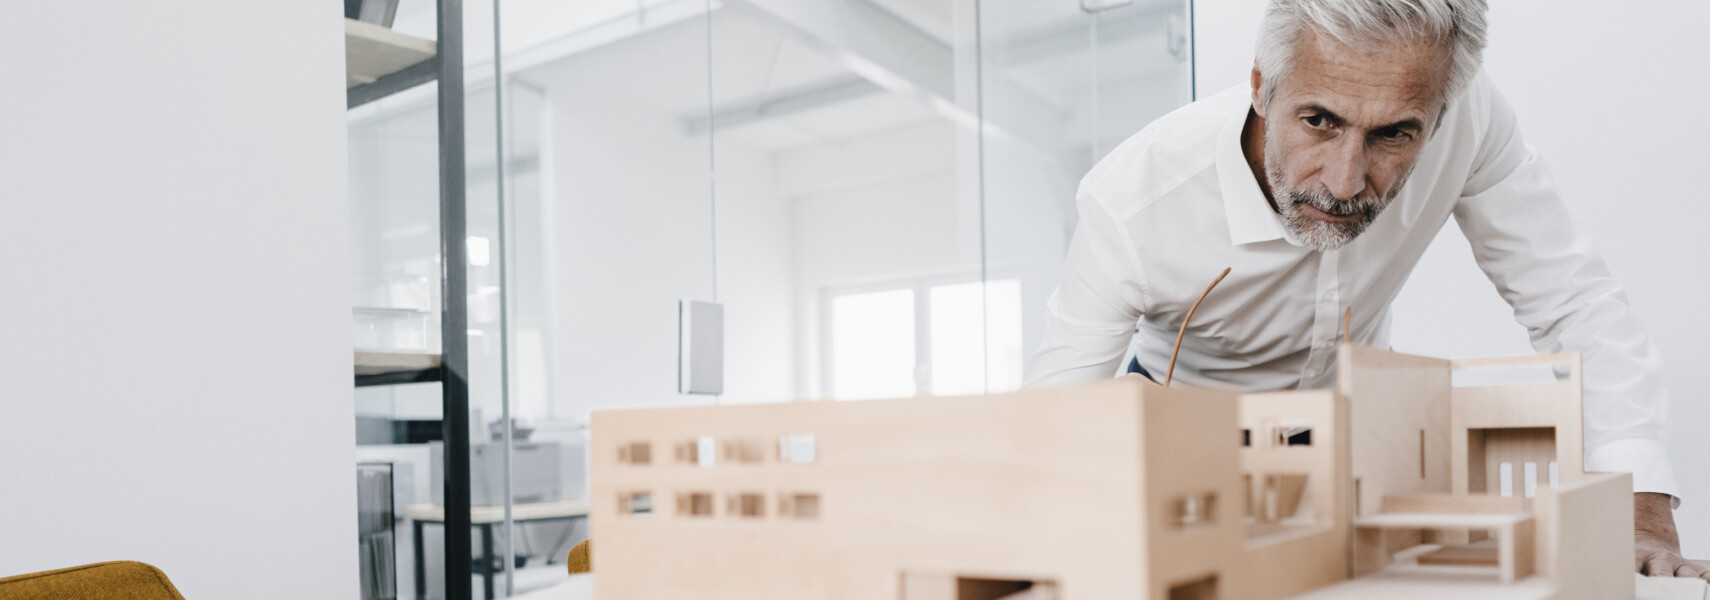 Mature Businessman Examining Architectural Model In Office